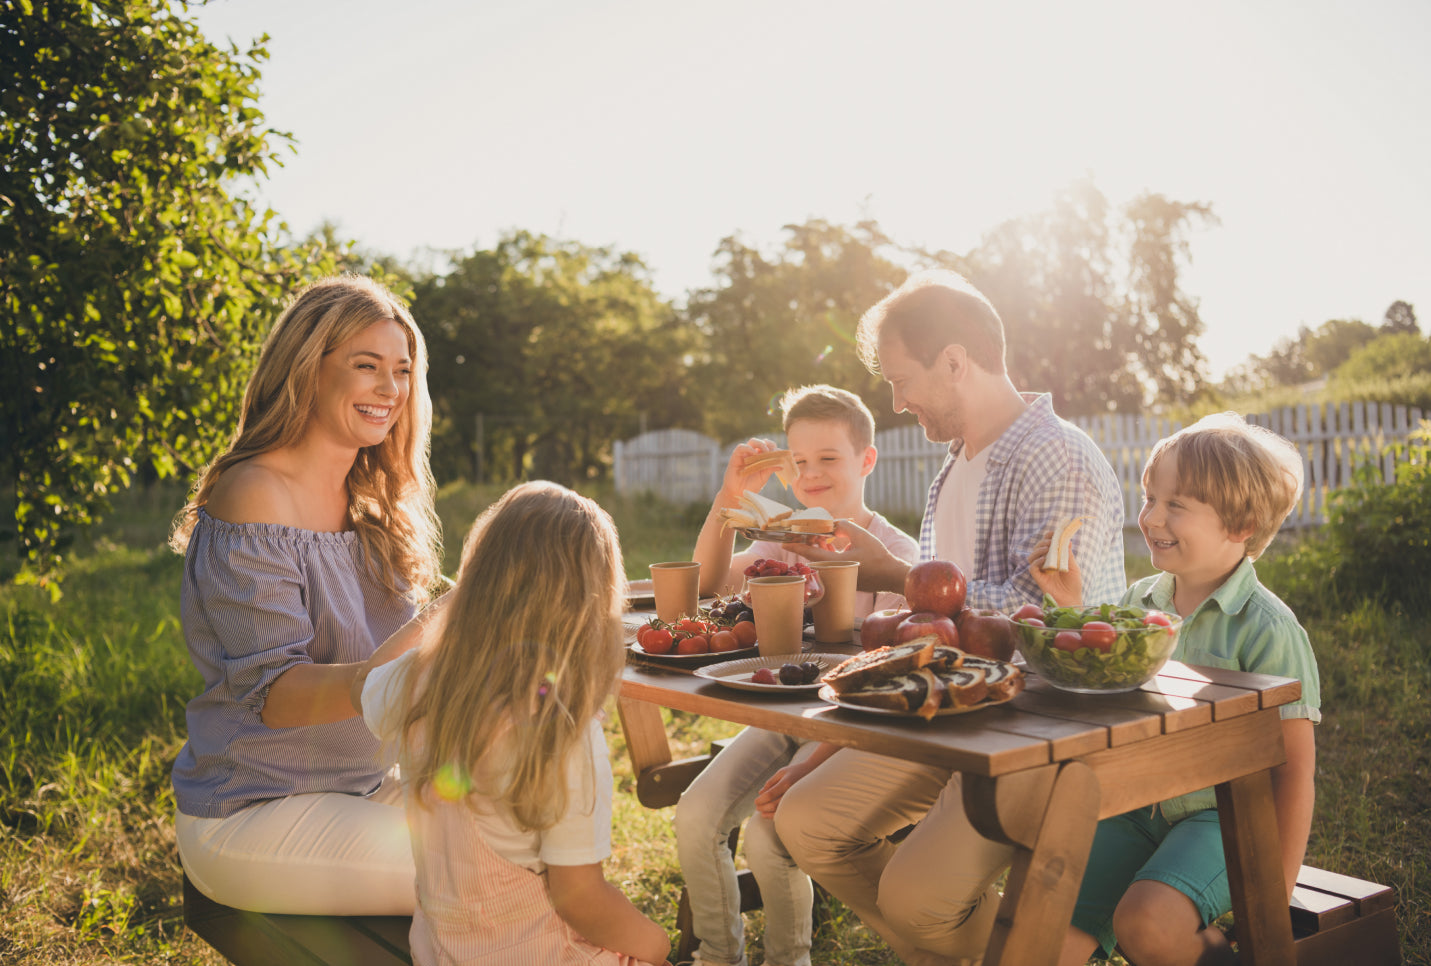 10 Backyard Picnic Ideas for the Whole Family